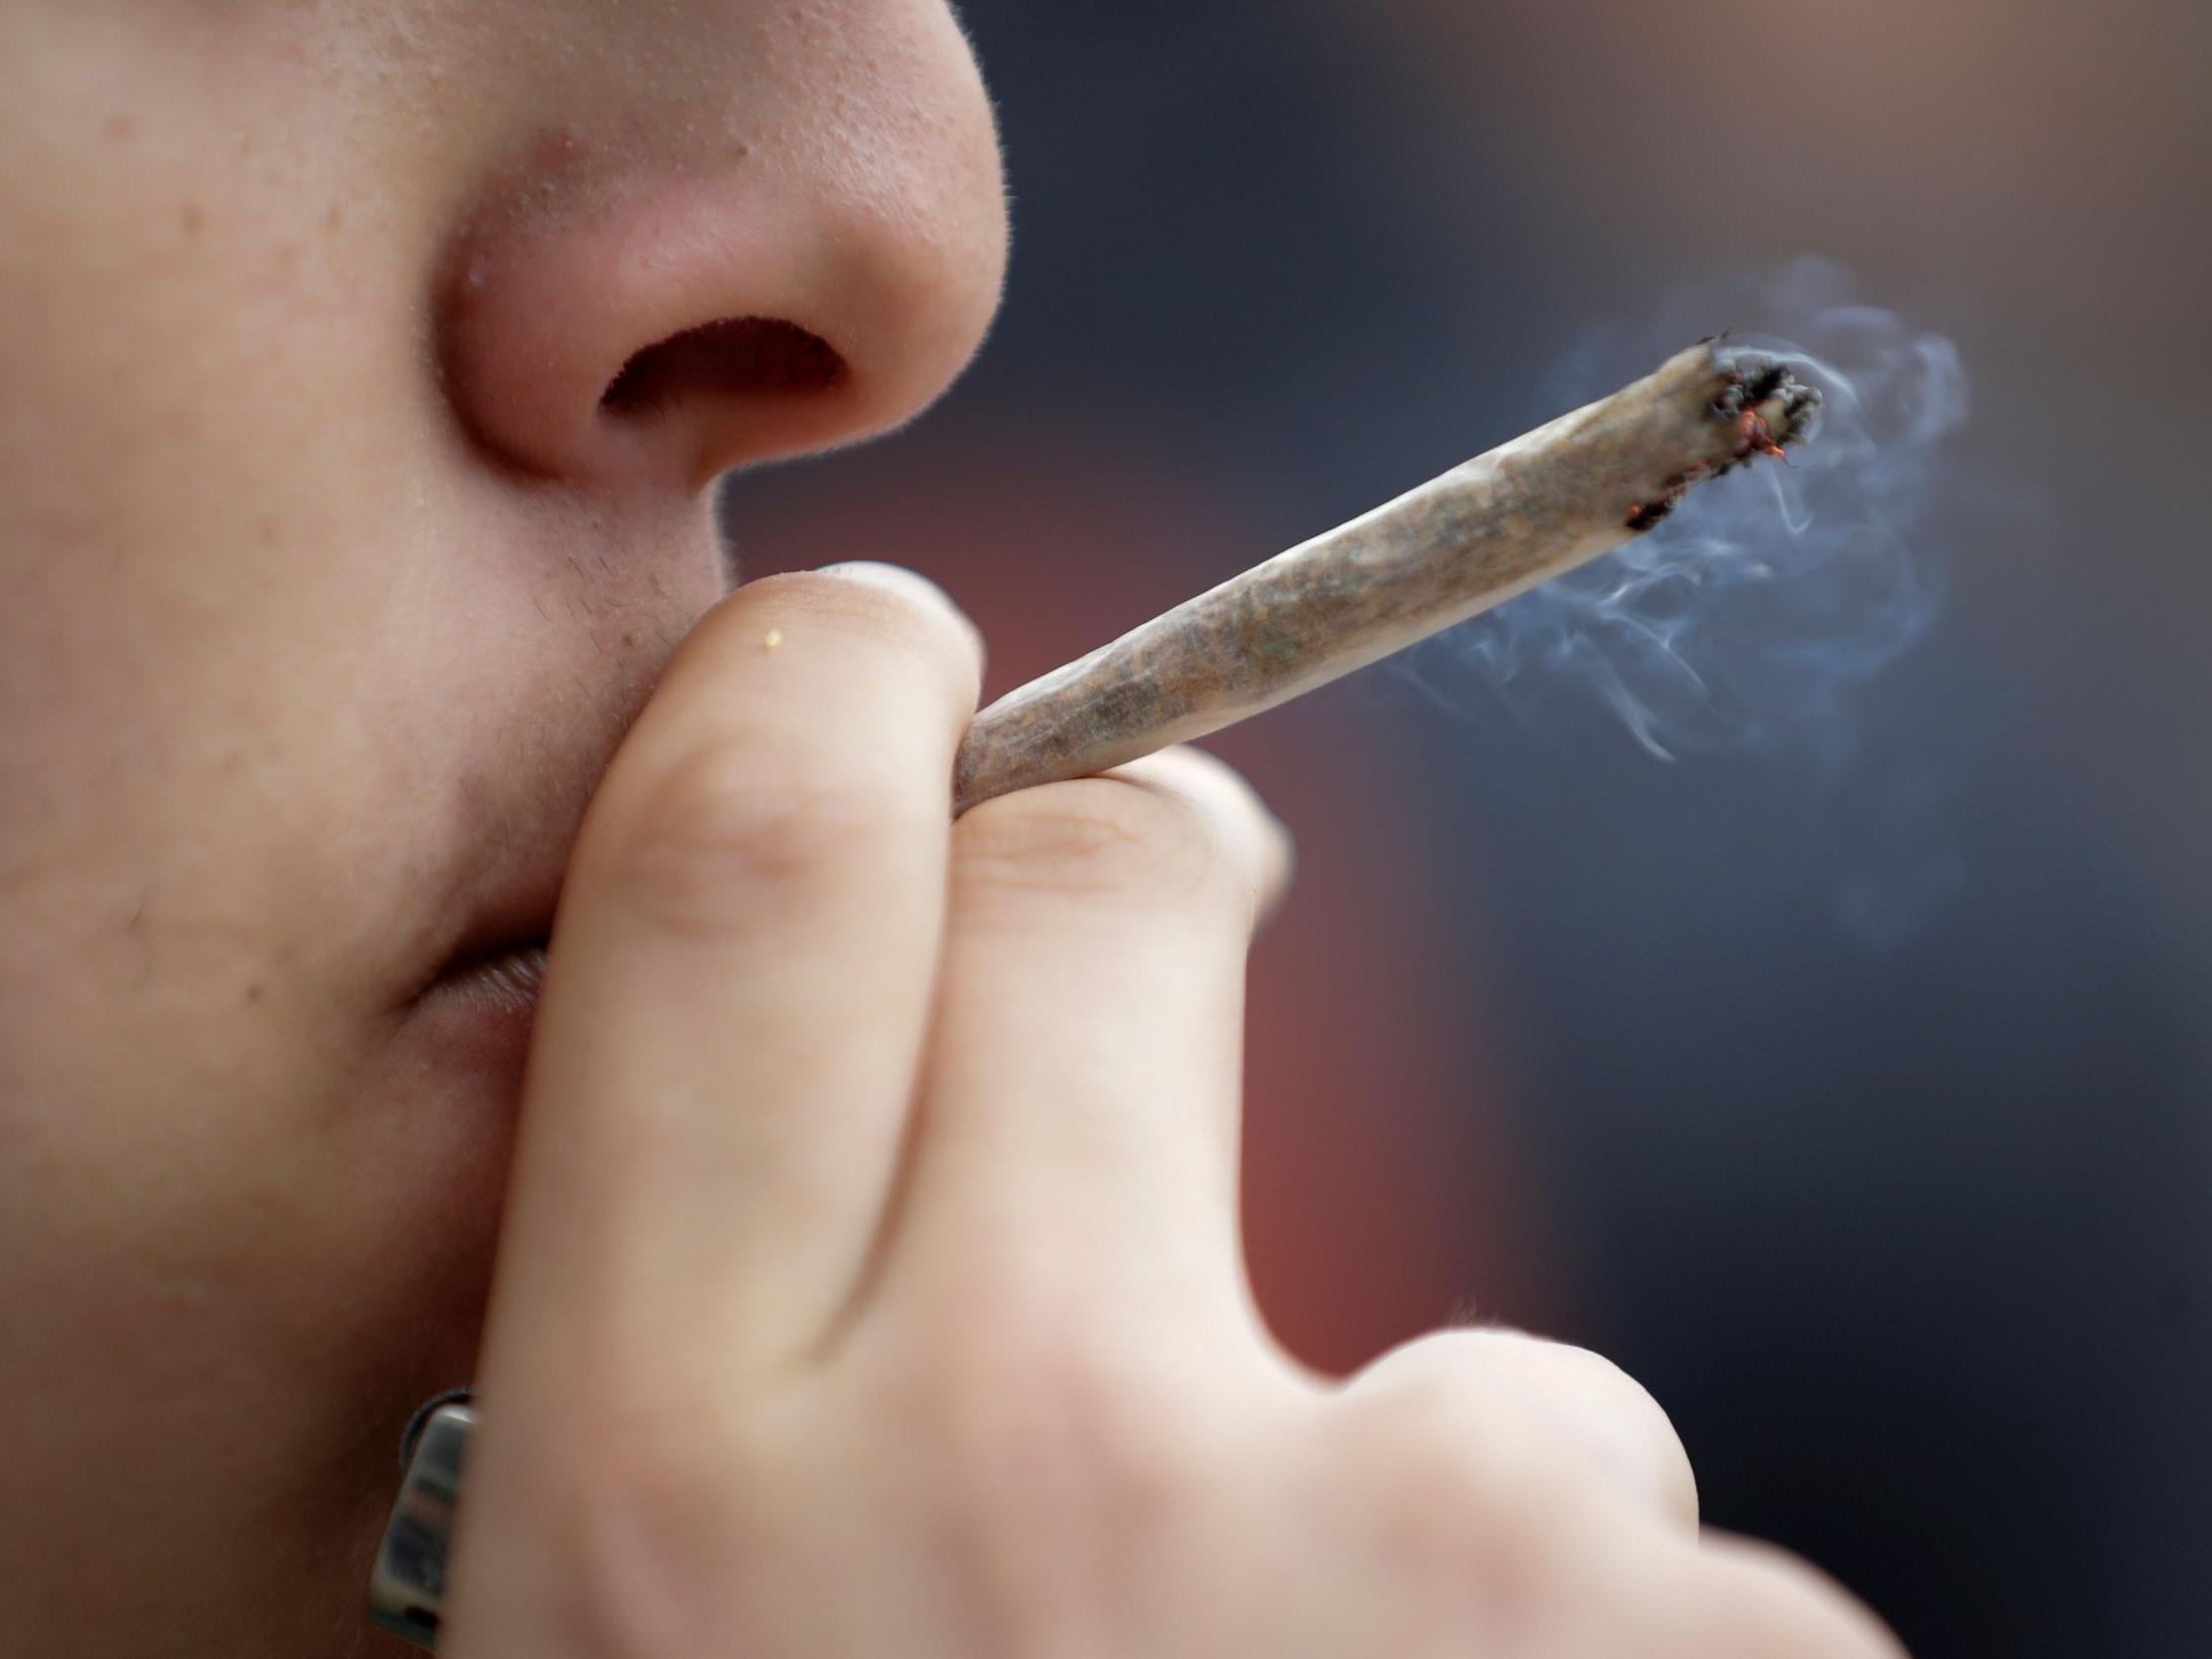 The study claims legalising cannabis will earn the UK billions in tax revenue